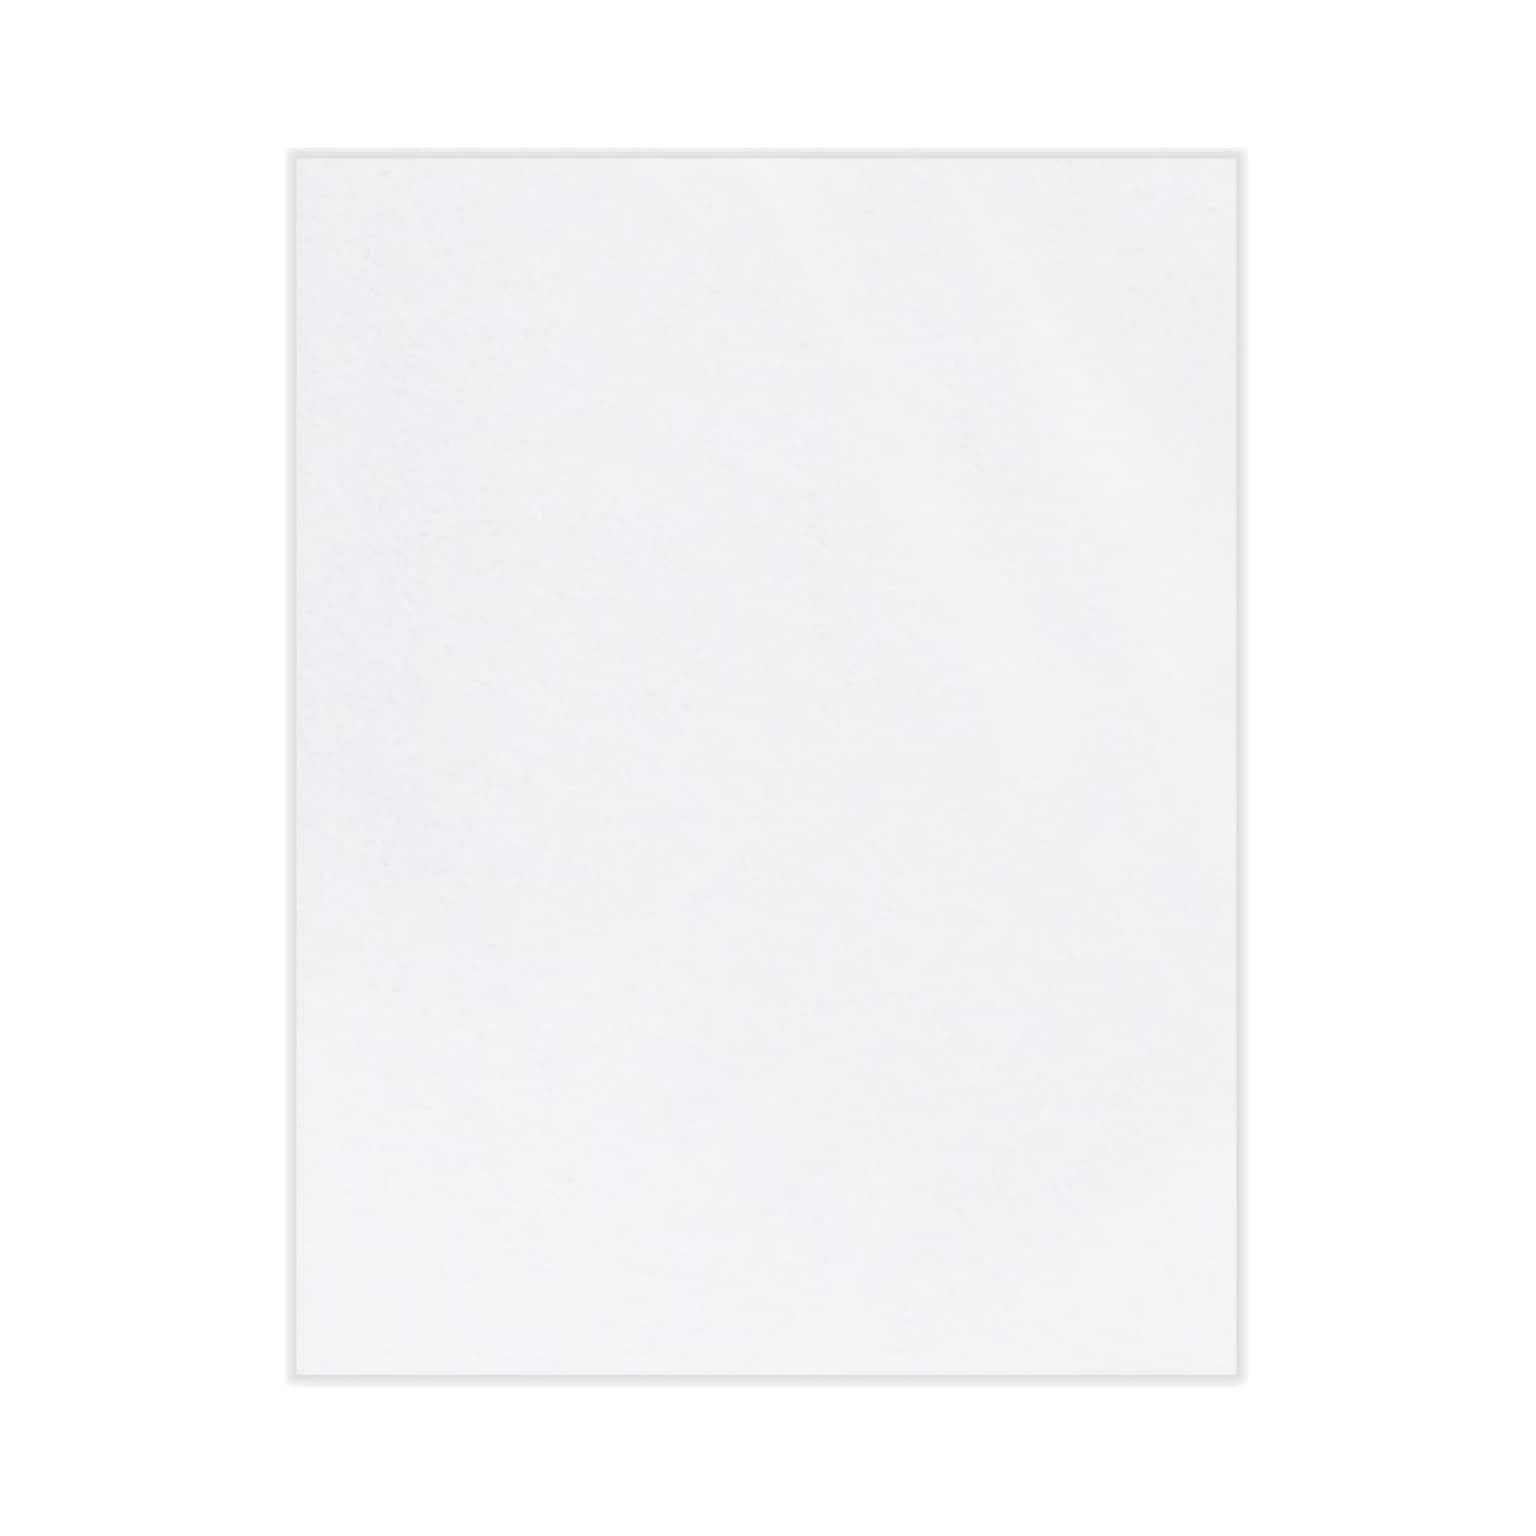 LUX 80lb. Bright White, 100% Recycled Cardstock, 8 1/2 x 11, Letter, 50 Sheets